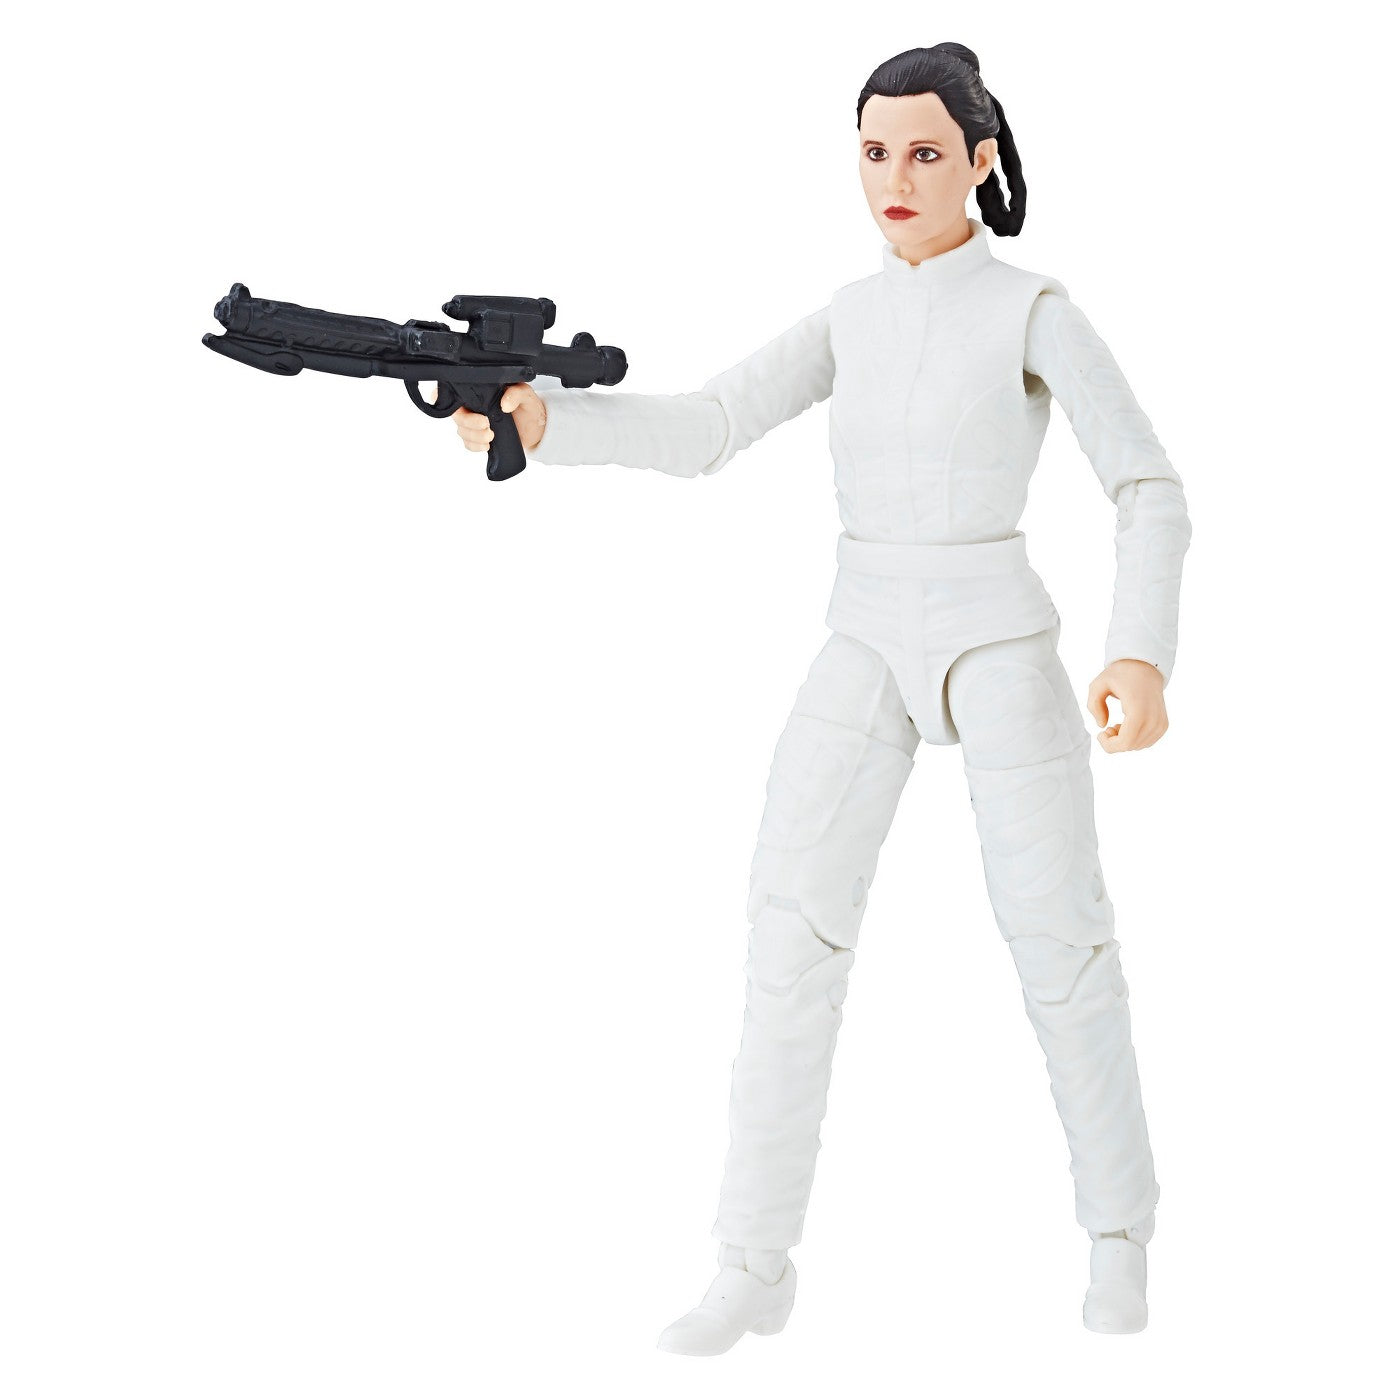 Hasbro Star Wars Black Series Empire Strikes Back Bespin Leia Exclusive 6 Inch Action Figure